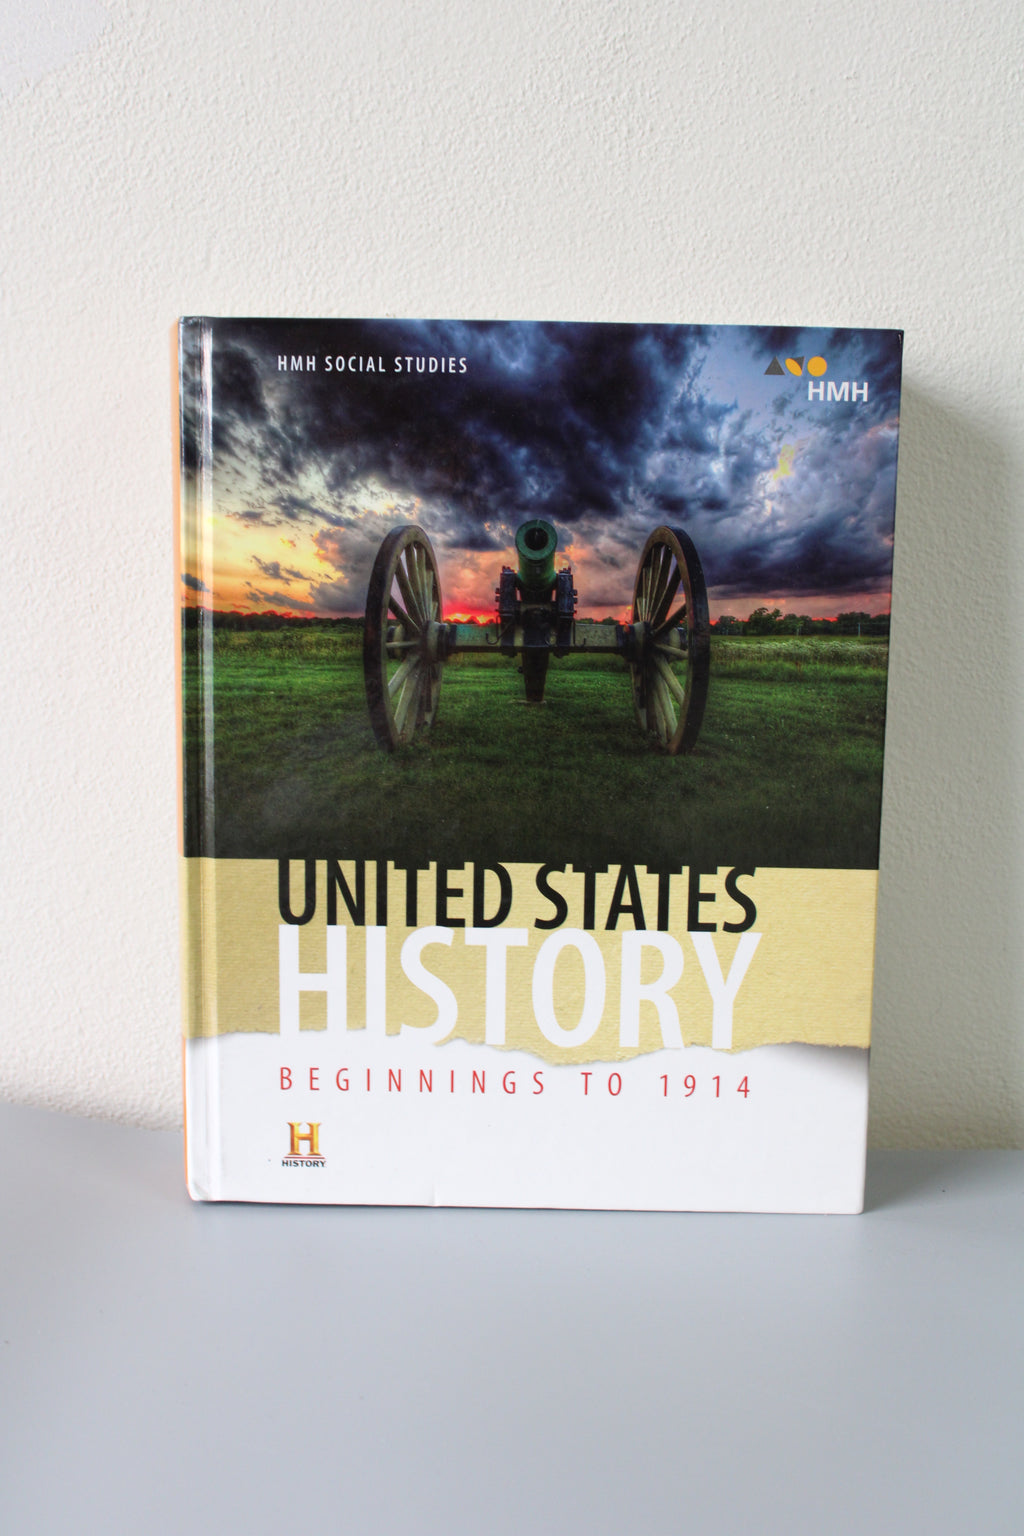 United States History: Beginnings to 1914